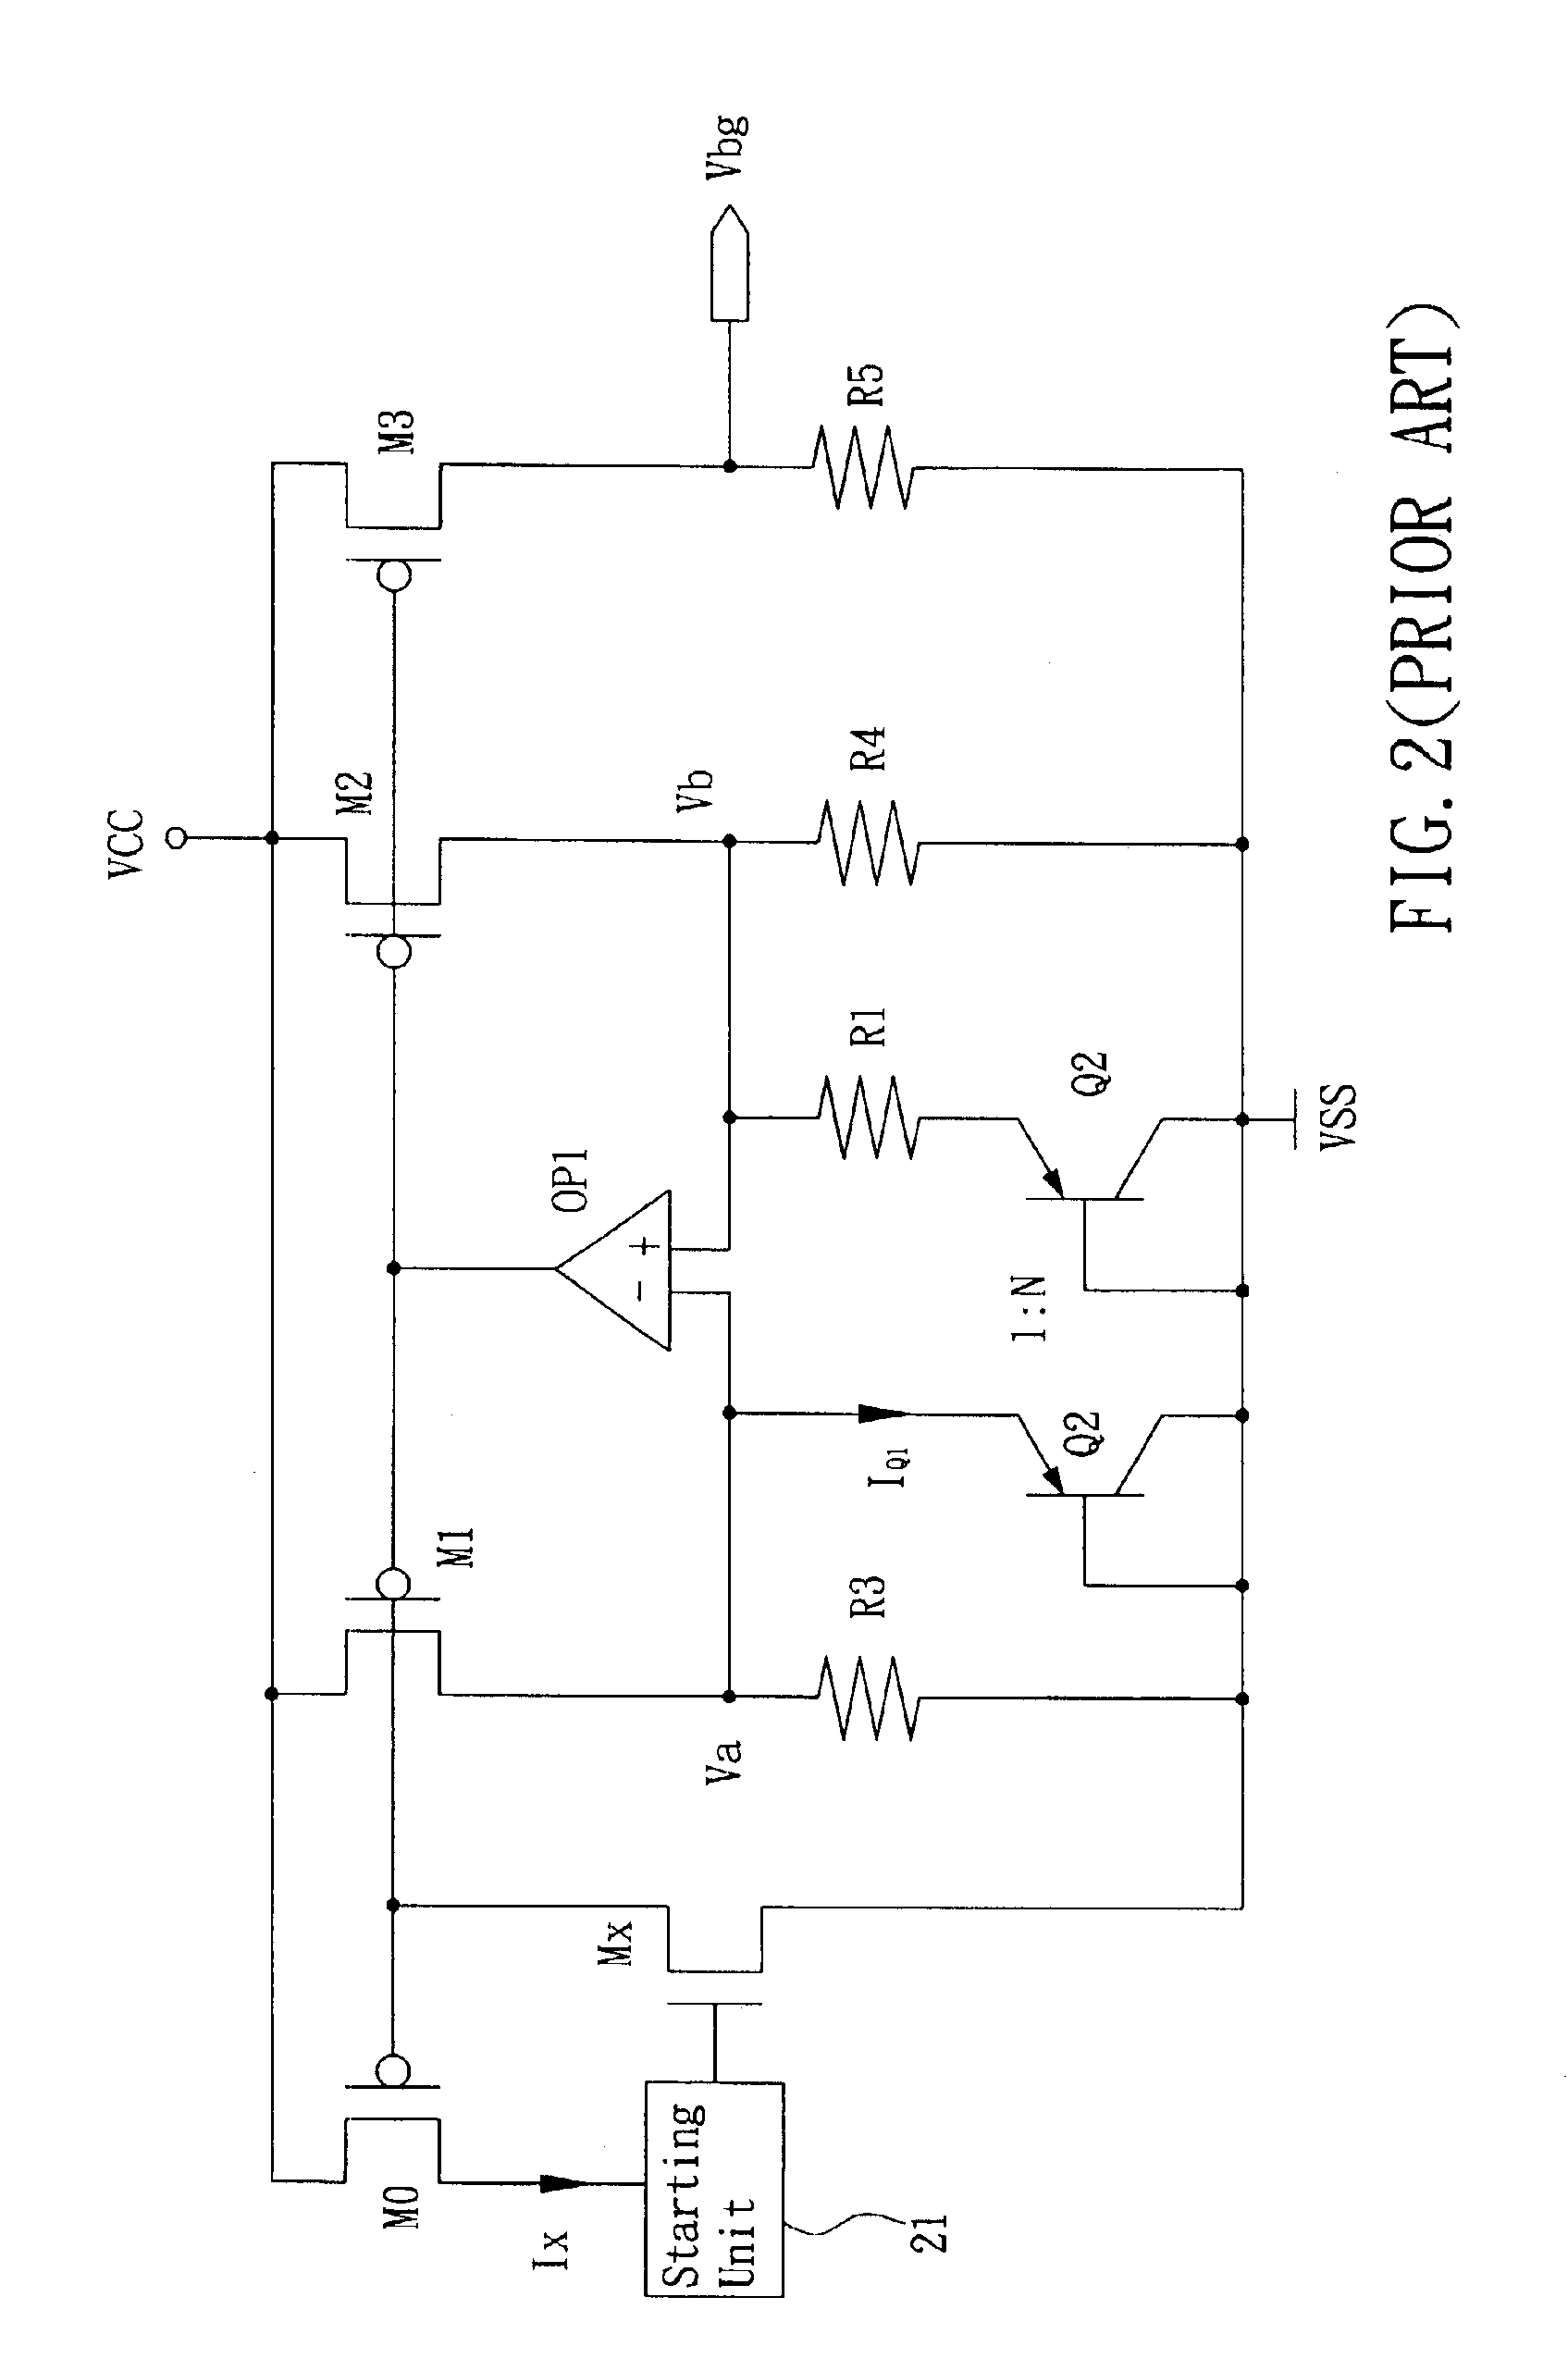 Fast start-up low-voltage bandgap voltage reference circuit